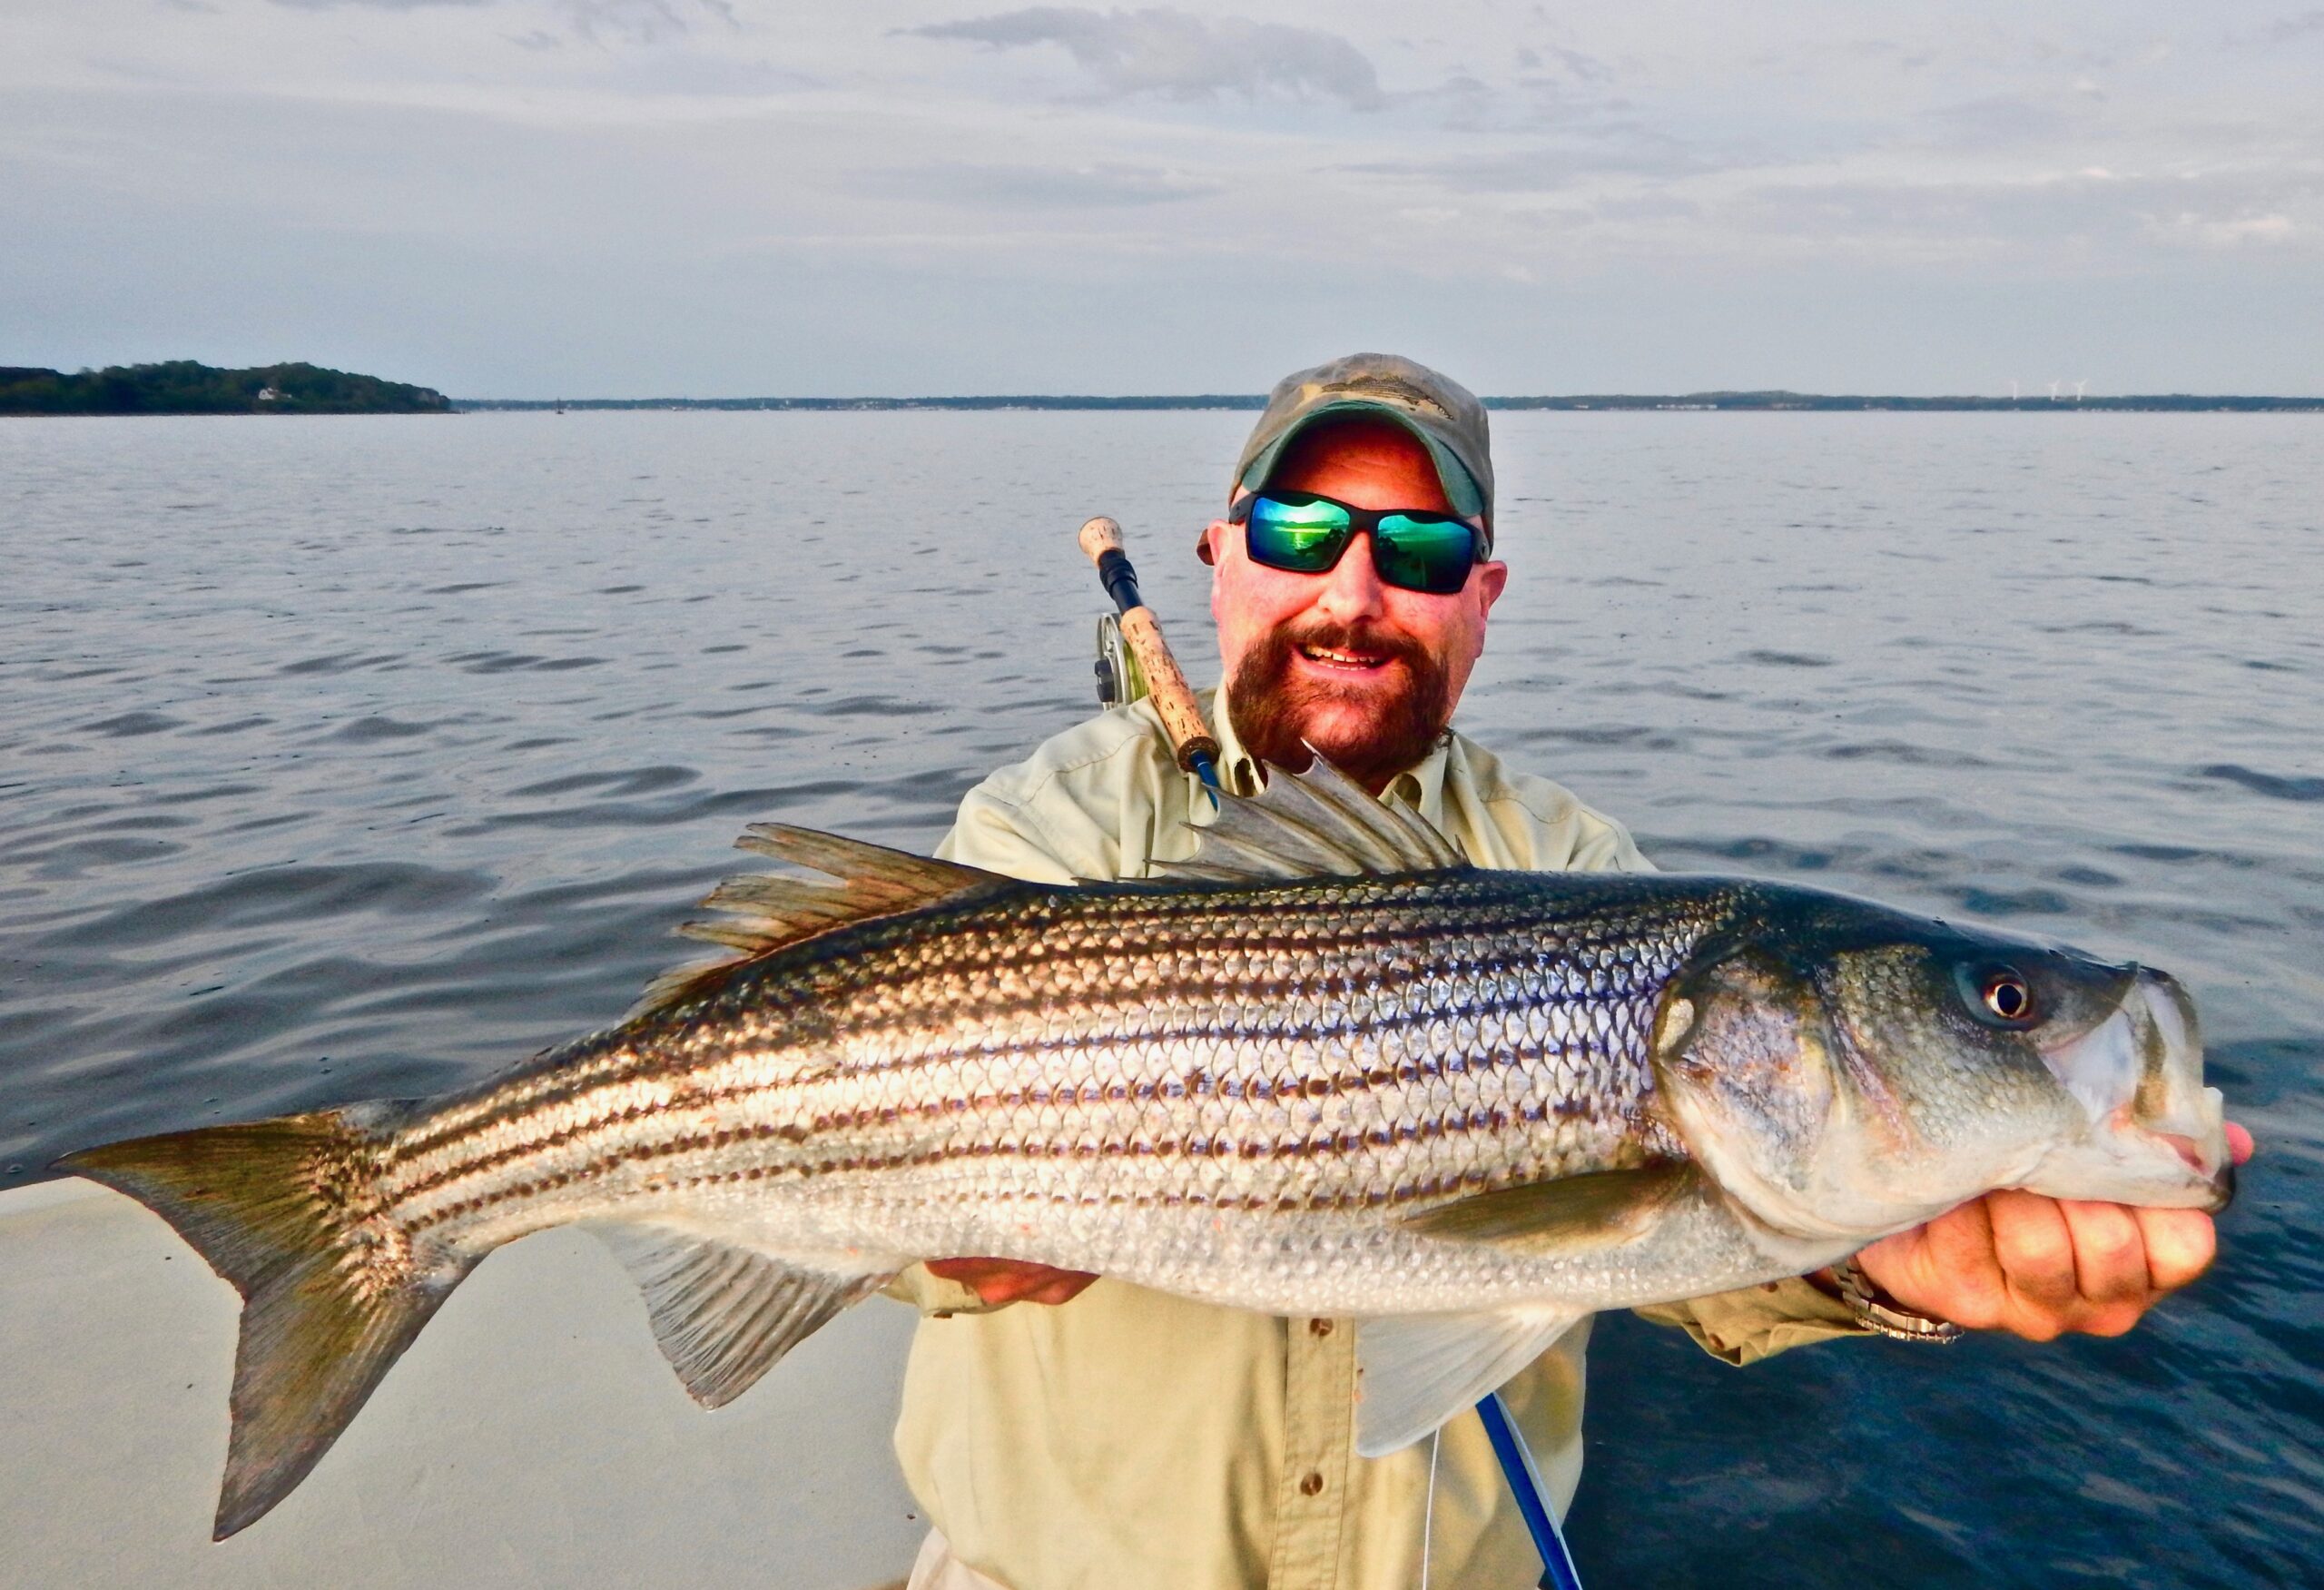 World-Class Morning On The Fly! – Baymen Guide Service, Inc